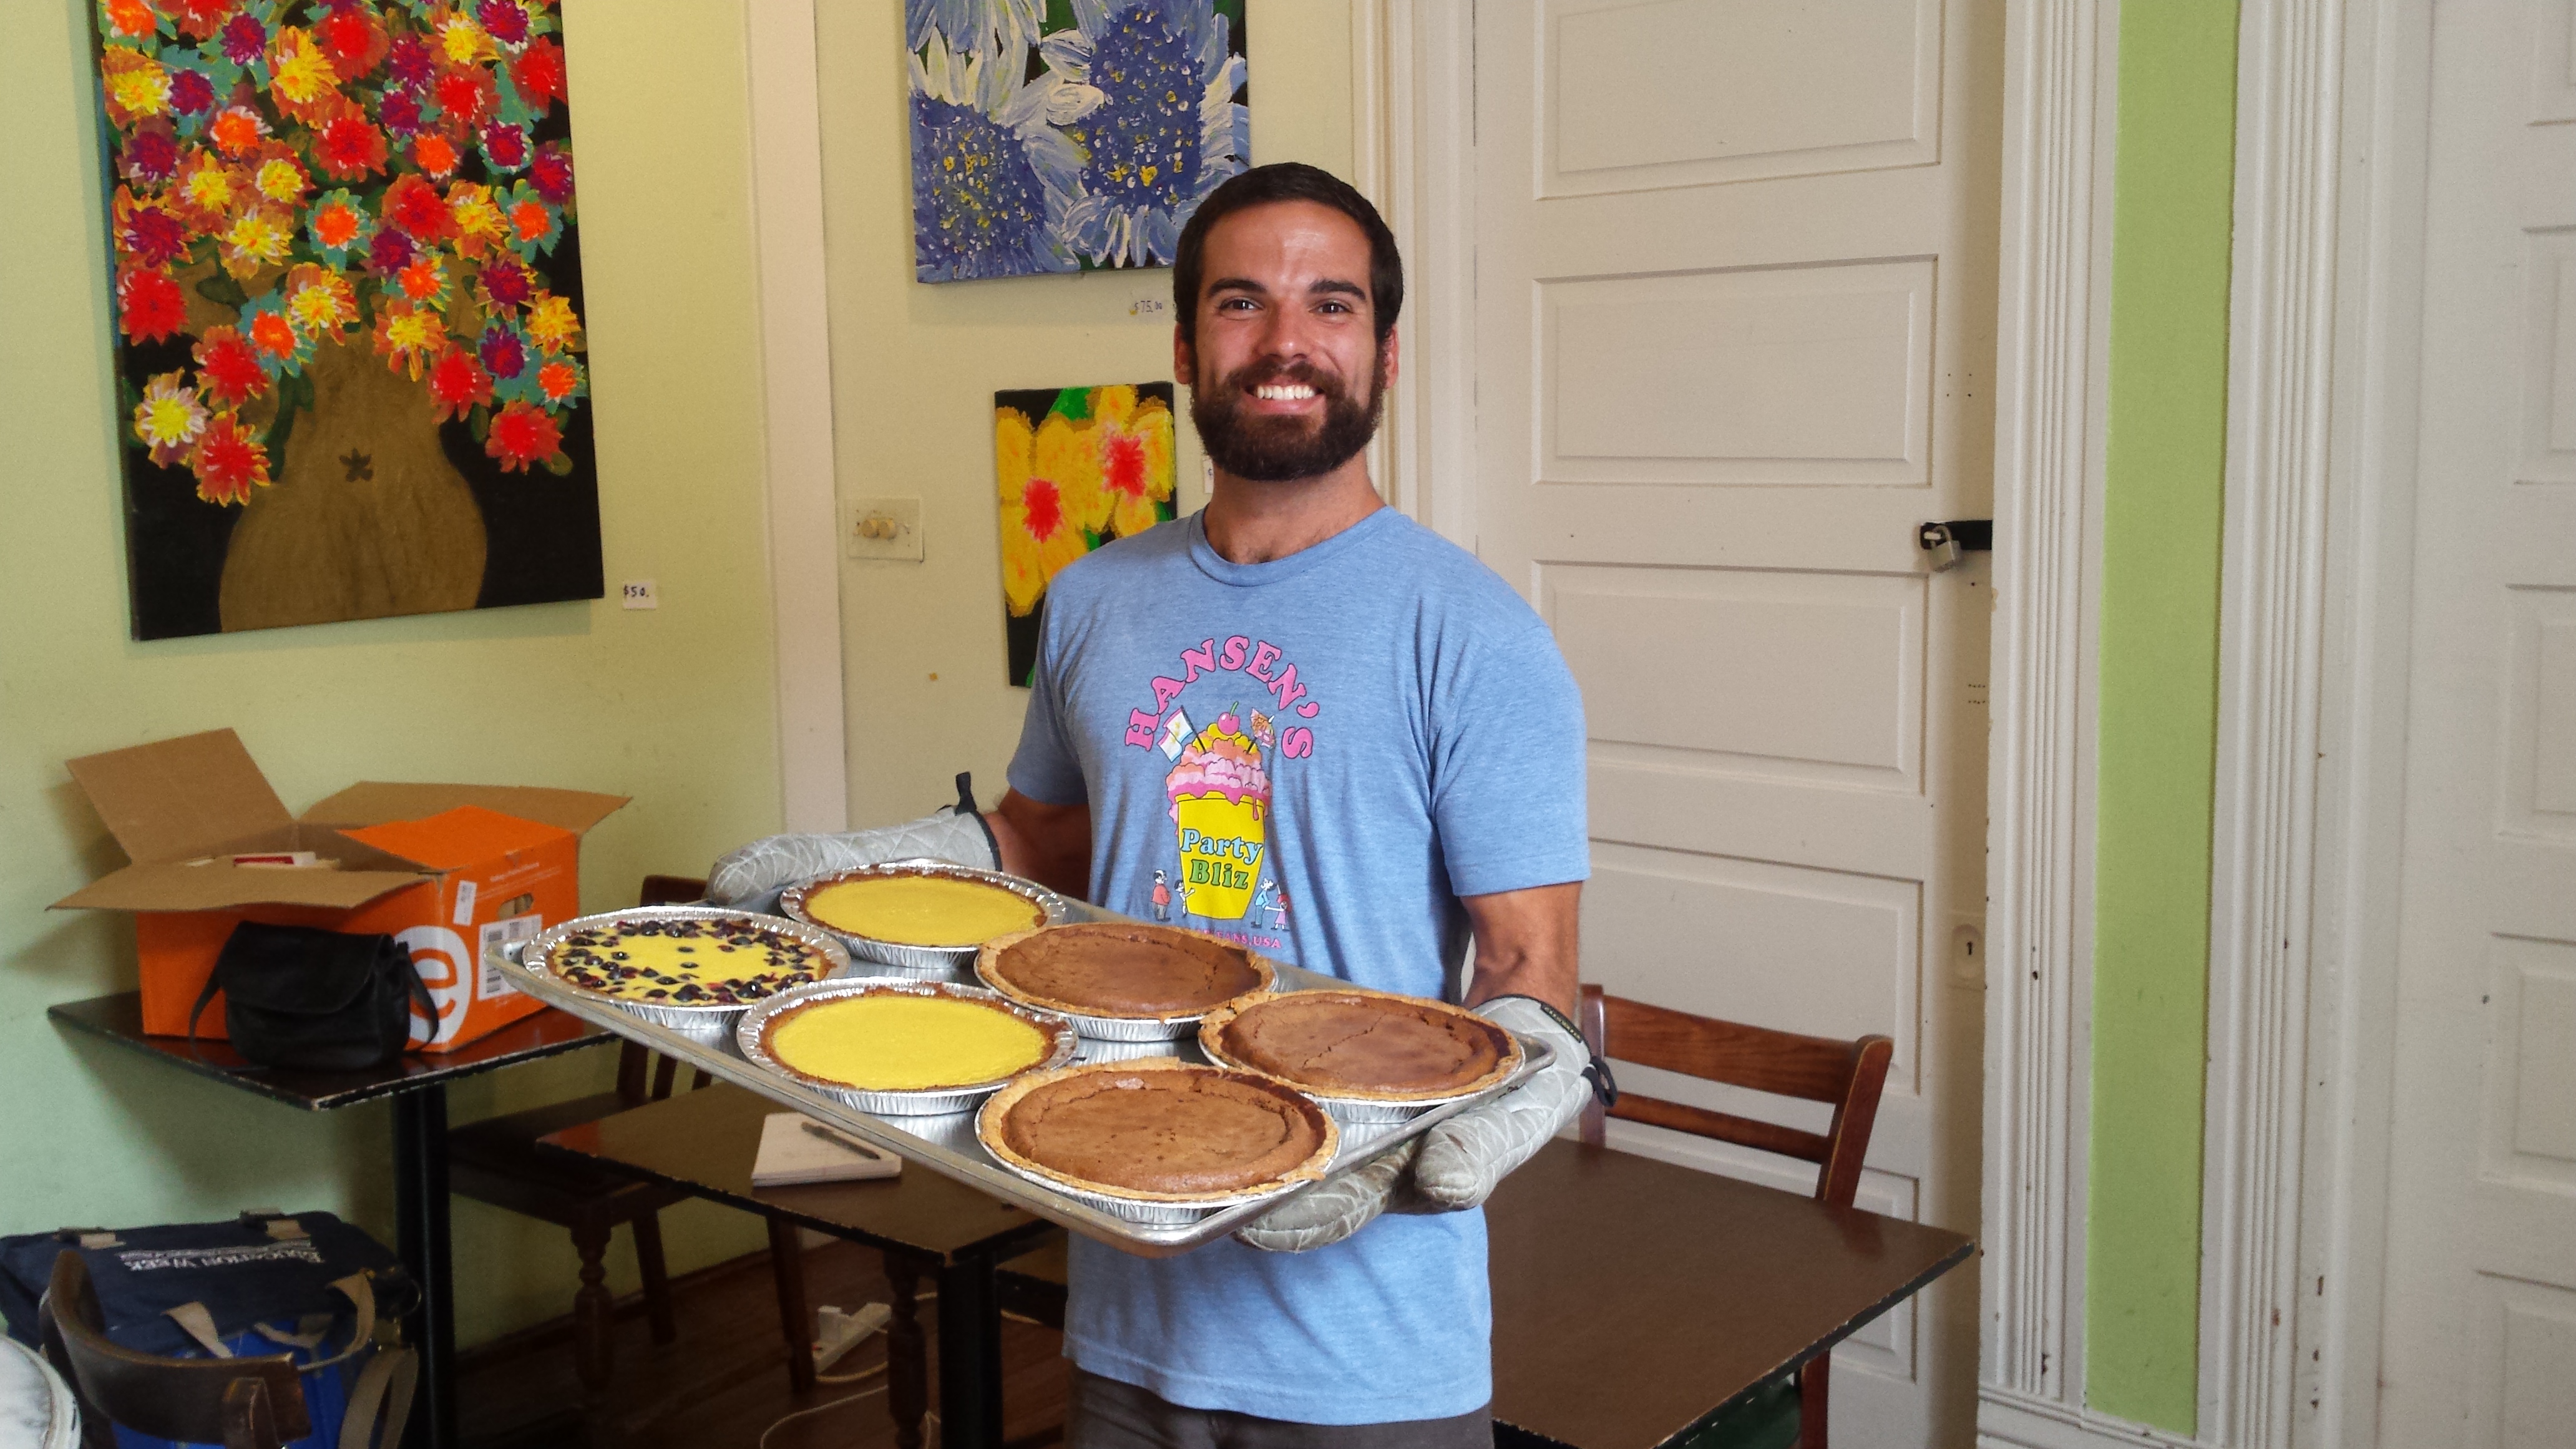 The NOLA Pie Guy, Nate Winner, with a few of his creations.